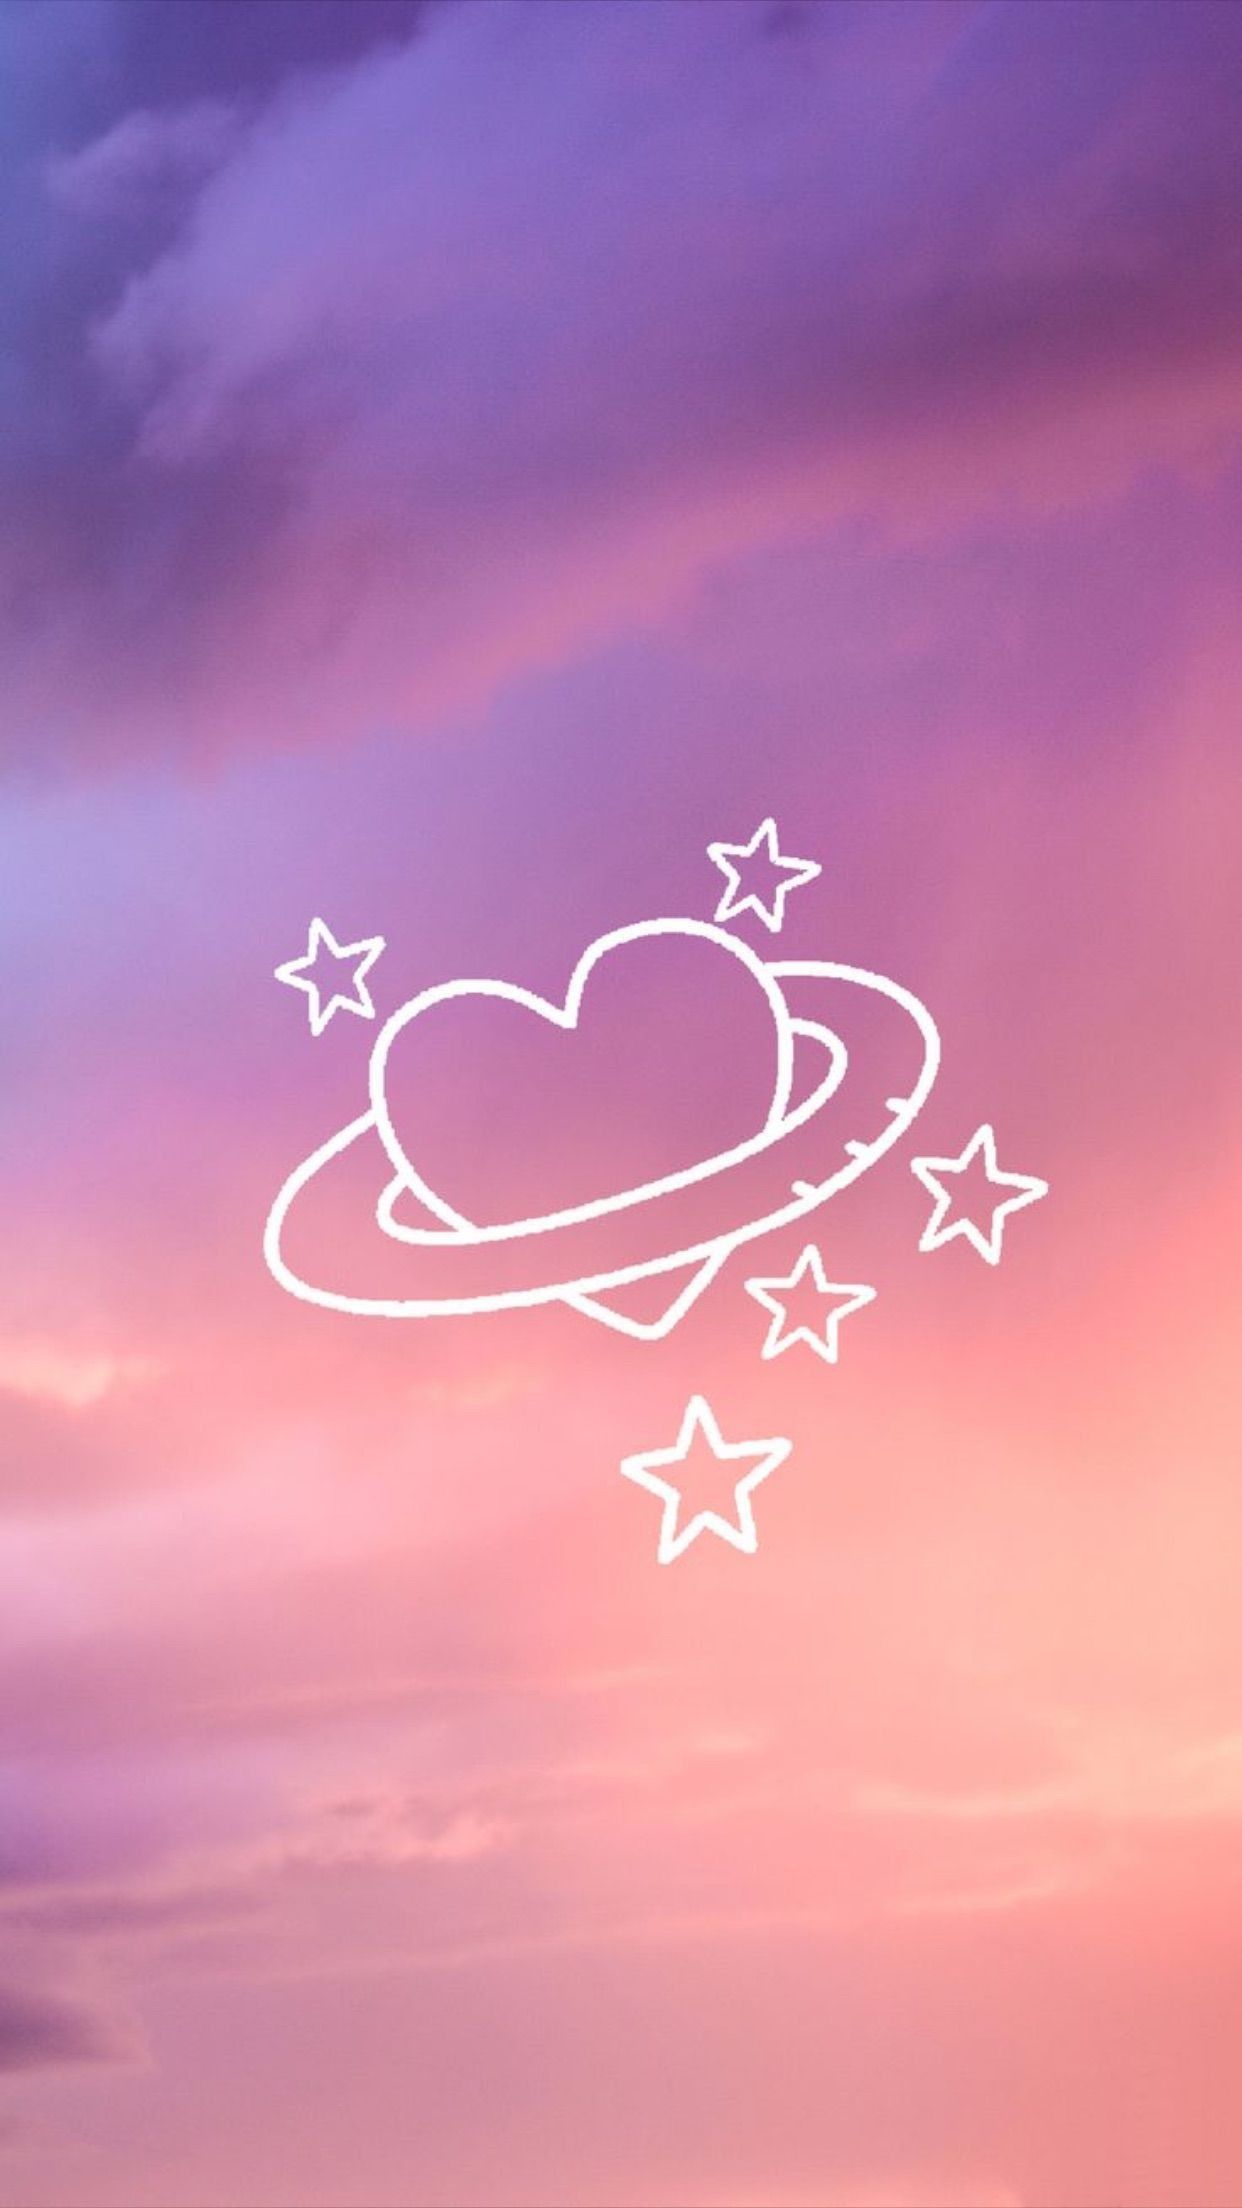 A heart shaped planet with stars in the background - Pink phone, heart, beautiful, pink heart